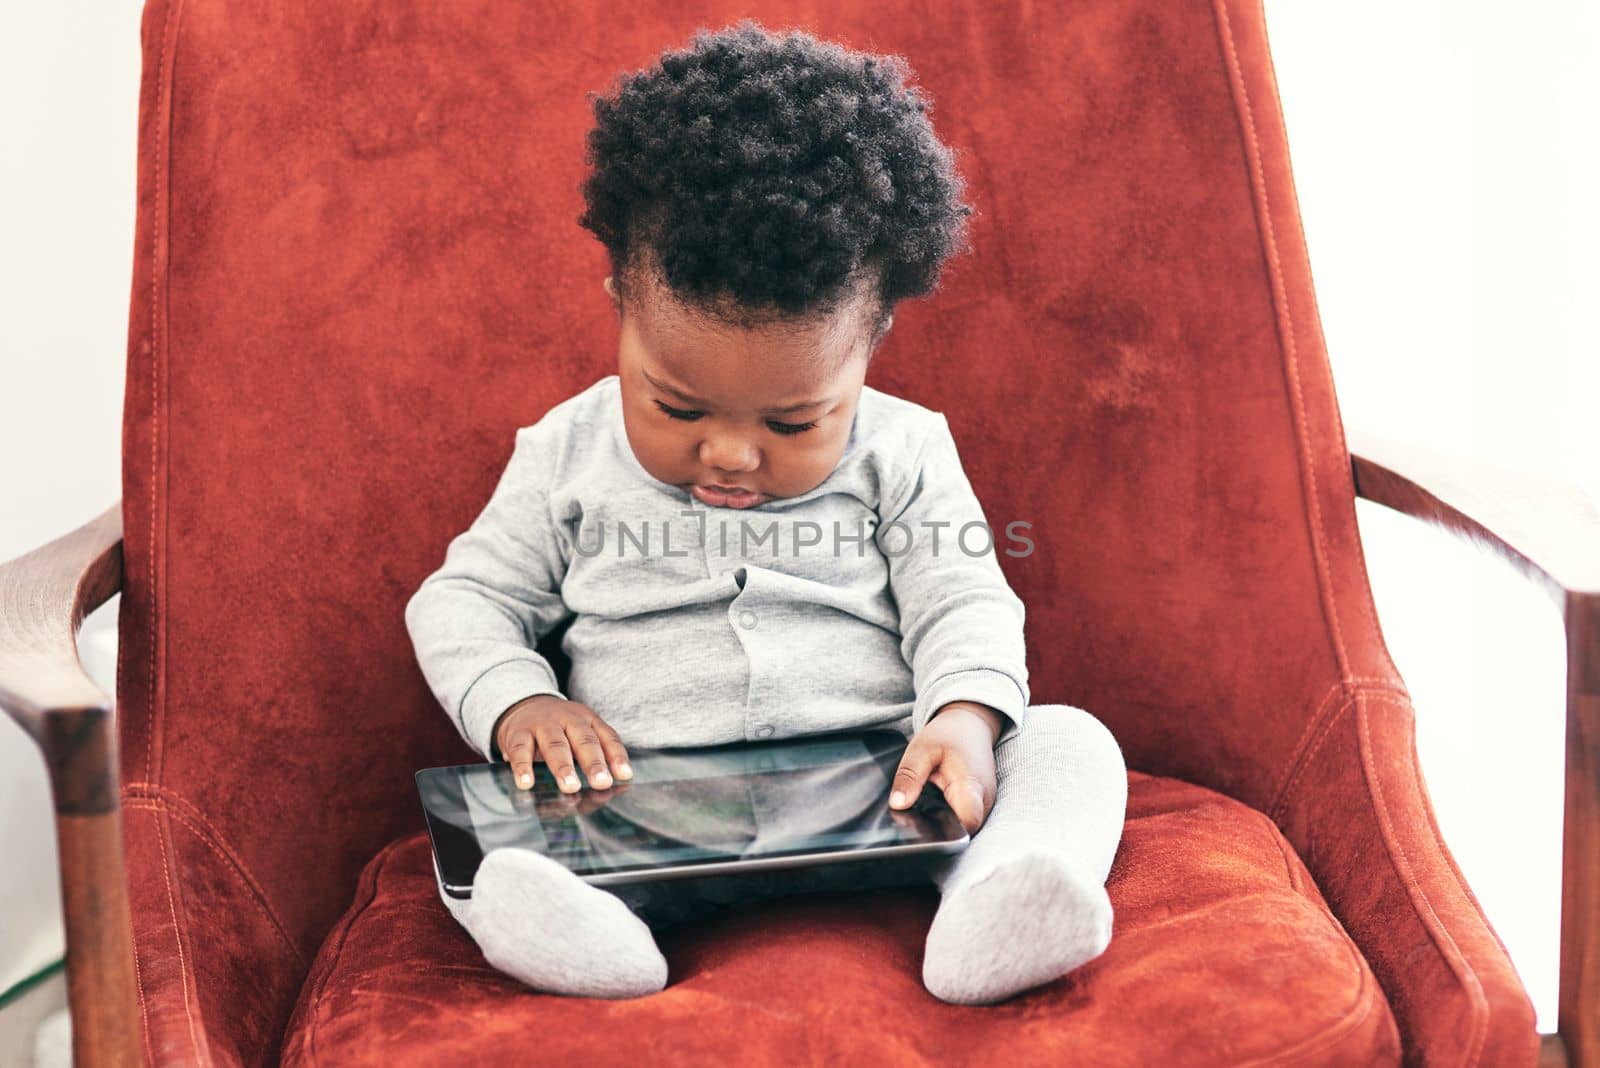 Hes a curious little one. a little baby boy sitting in a chair holding a digital tablet